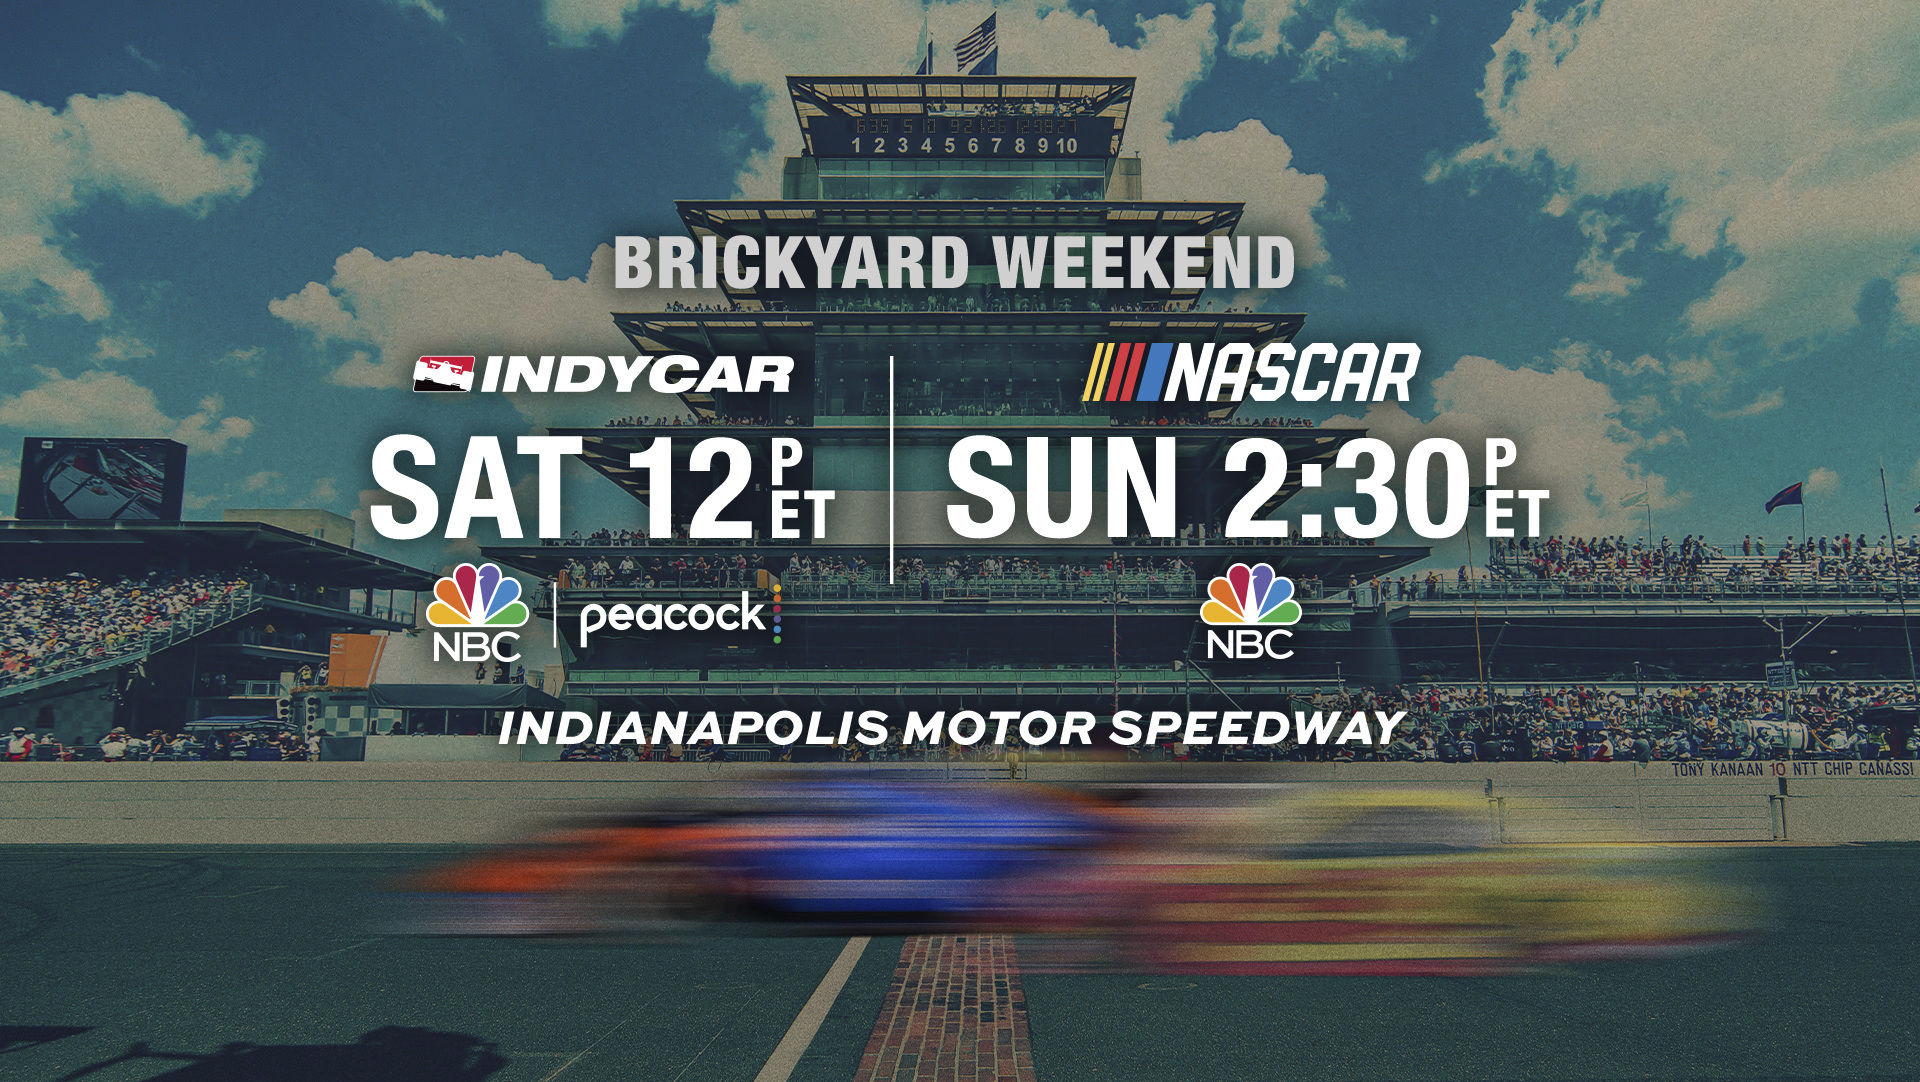 NASCAR-INDYCAR CROSSOVER WEEKEND AT INDIANAPOLIS MOTOR SPEEDWAY PRESENTED SATURDAY AND SUNDAY ACROSS NBC, PEACOCK and USA NETWORK